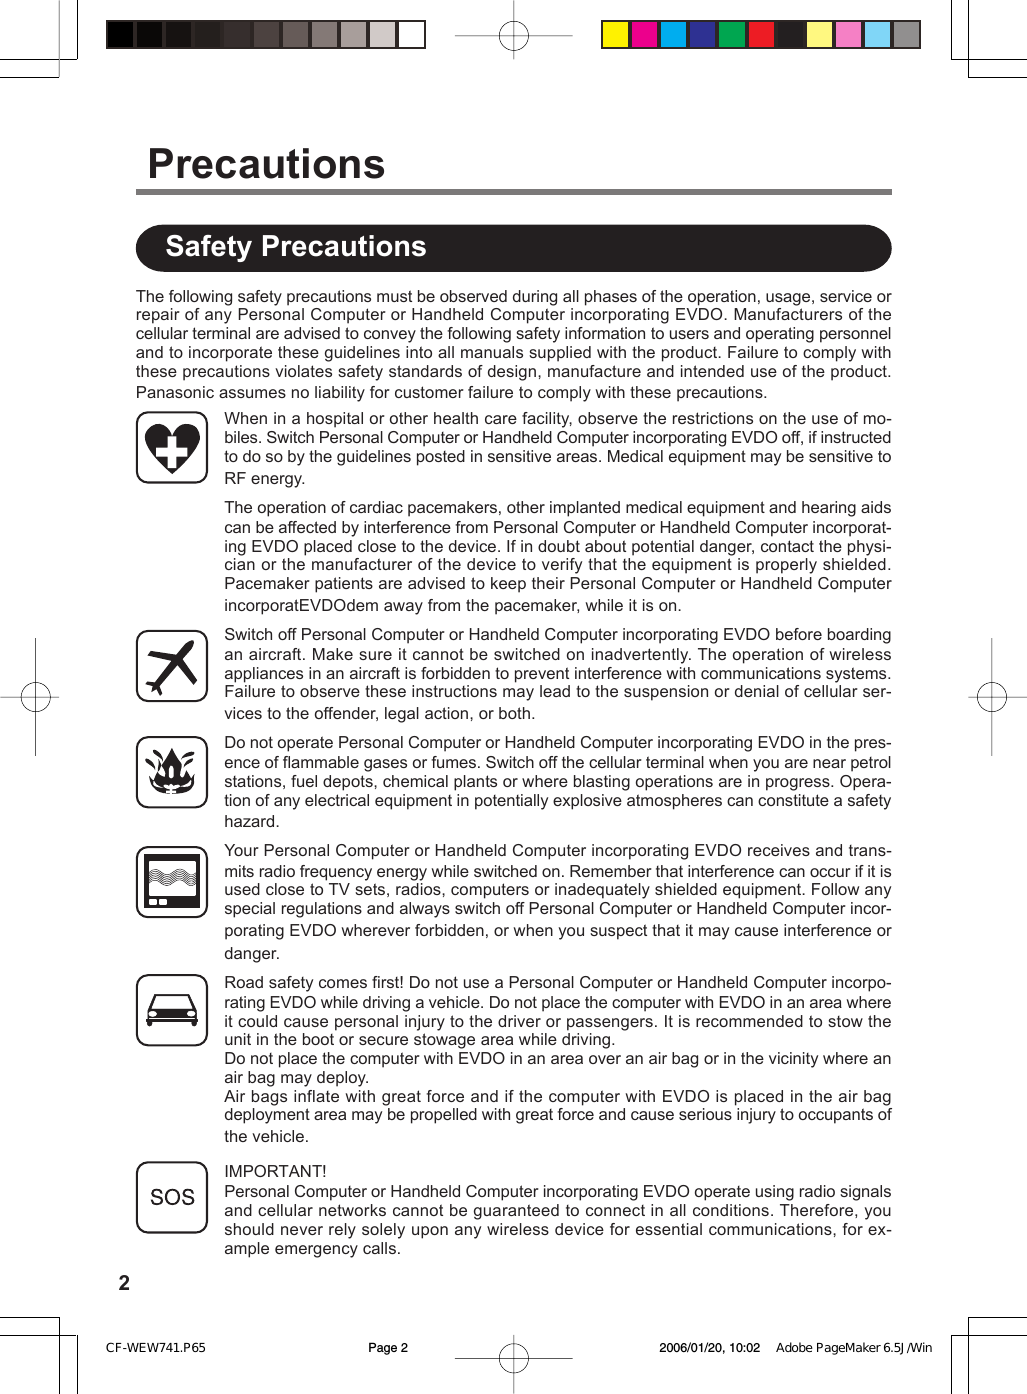 2The following safety precautions must be observed during all phases of the operation, usage, service orrepair of any Personal Computer or Handheld Computer incorporating EVDO. Manufacturers of thecellular terminal are advised to convey the following safety information to users and operating personneland to incorporate these guidelines into all manuals supplied with the product. Failure to comply withthese precautions violates safety standards of design, manufacture and intended use of the product.Panasonic assumes no liability for customer failure to comply with these precautions.When in a hospital or other health care facility, observe the restrictions on the use of mo-biles. Switch Personal Computer or Handheld Computer incorporating EVDO off, if instructedto do so by the guidelines posted in sensitive areas. Medical equipment may be sensitive toRF energy.The operation of cardiac pacemakers, other implanted medical equipment and hearing aidscan be affected by interference from Personal Computer or Handheld Computer incorporat-ing EVDO placed close to the device. If in doubt about potential danger, contact the physi-cian or the manufacturer of the device to verify that the equipment is properly shielded.Pacemaker patients are advised to keep their Personal Computer or Handheld ComputerincorporatEVDOdem away from the pacemaker, while it is on.Switch off Personal Computer or Handheld Computer incorporating EVDO before boardingan aircraft. Make sure it cannot be switched on inadvertently. The operation of wirelessappliances in an aircraft is forbidden to prevent interference with communications systems.Failure to observe these instructions may lead to the suspension or denial of cellular ser-vices to the offender, legal action, or both.Do not operate Personal Computer or Handheld Computer incorporating EVDO in the pres-ence of flammable gases or fumes. Switch off the cellular terminal when you are near petrolstations, fuel depots, chemical plants or where blasting operations are in progress. Opera-tion of any electrical equipment in potentially explosive atmospheres can constitute a safetyhazard.Your Personal Computer or Handheld Computer incorporating EVDO receives and trans-mits radio frequency energy while switched on. Remember that interference can occur if it isused close to TV sets, radios, computers or inadequately shielded equipment. Follow anyspecial regulations and always switch off Personal Computer or Handheld Computer incor-porating EVDO wherever forbidden, or when you suspect that it may cause interference ordanger.Road safety comes first! Do not use a Personal Computer or Handheld Computer incorpo-rating EVDO while driving a vehicle. Do not place the computer with EVDO in an area whereit could cause personal injury to the driver or passengers. It is recommended to stow theunit in the boot or secure stowage area while driving.Do not place the computer with EVDO in an area over an air bag or in the vicinity where anair bag may deploy.Air bags inflate with great force and if the computer with EVDO is placed in the air bagdeployment area may be propelled with great force and cause serious injury to occupants ofthe vehicle.IMPORTANT!Personal Computer or Handheld Computer incorporating EVDO operate using radio signalsand cellular networks cannot be guaranteed to connect in all conditions. Therefore, youshould never rely solely upon any wireless device for essential communications, for ex-ample emergency calls.Safety PrecautionsPrecautionsCF-WEW741.P65 2006/01/20, 10:02Page 2 Adobe PageMaker 6.5J/Win